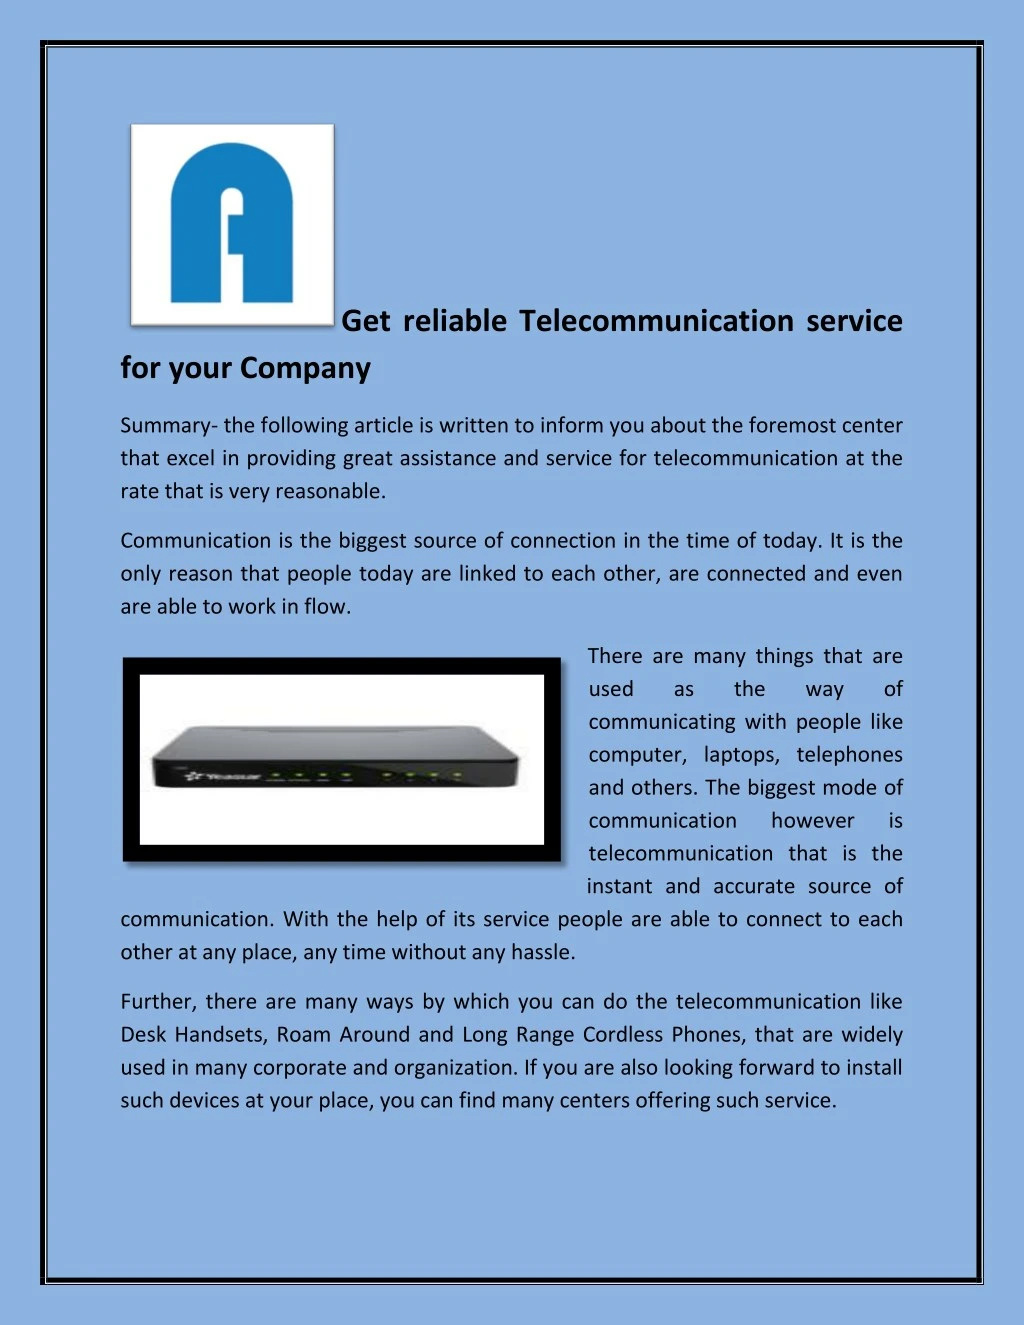 get reliable telecommunication service for your